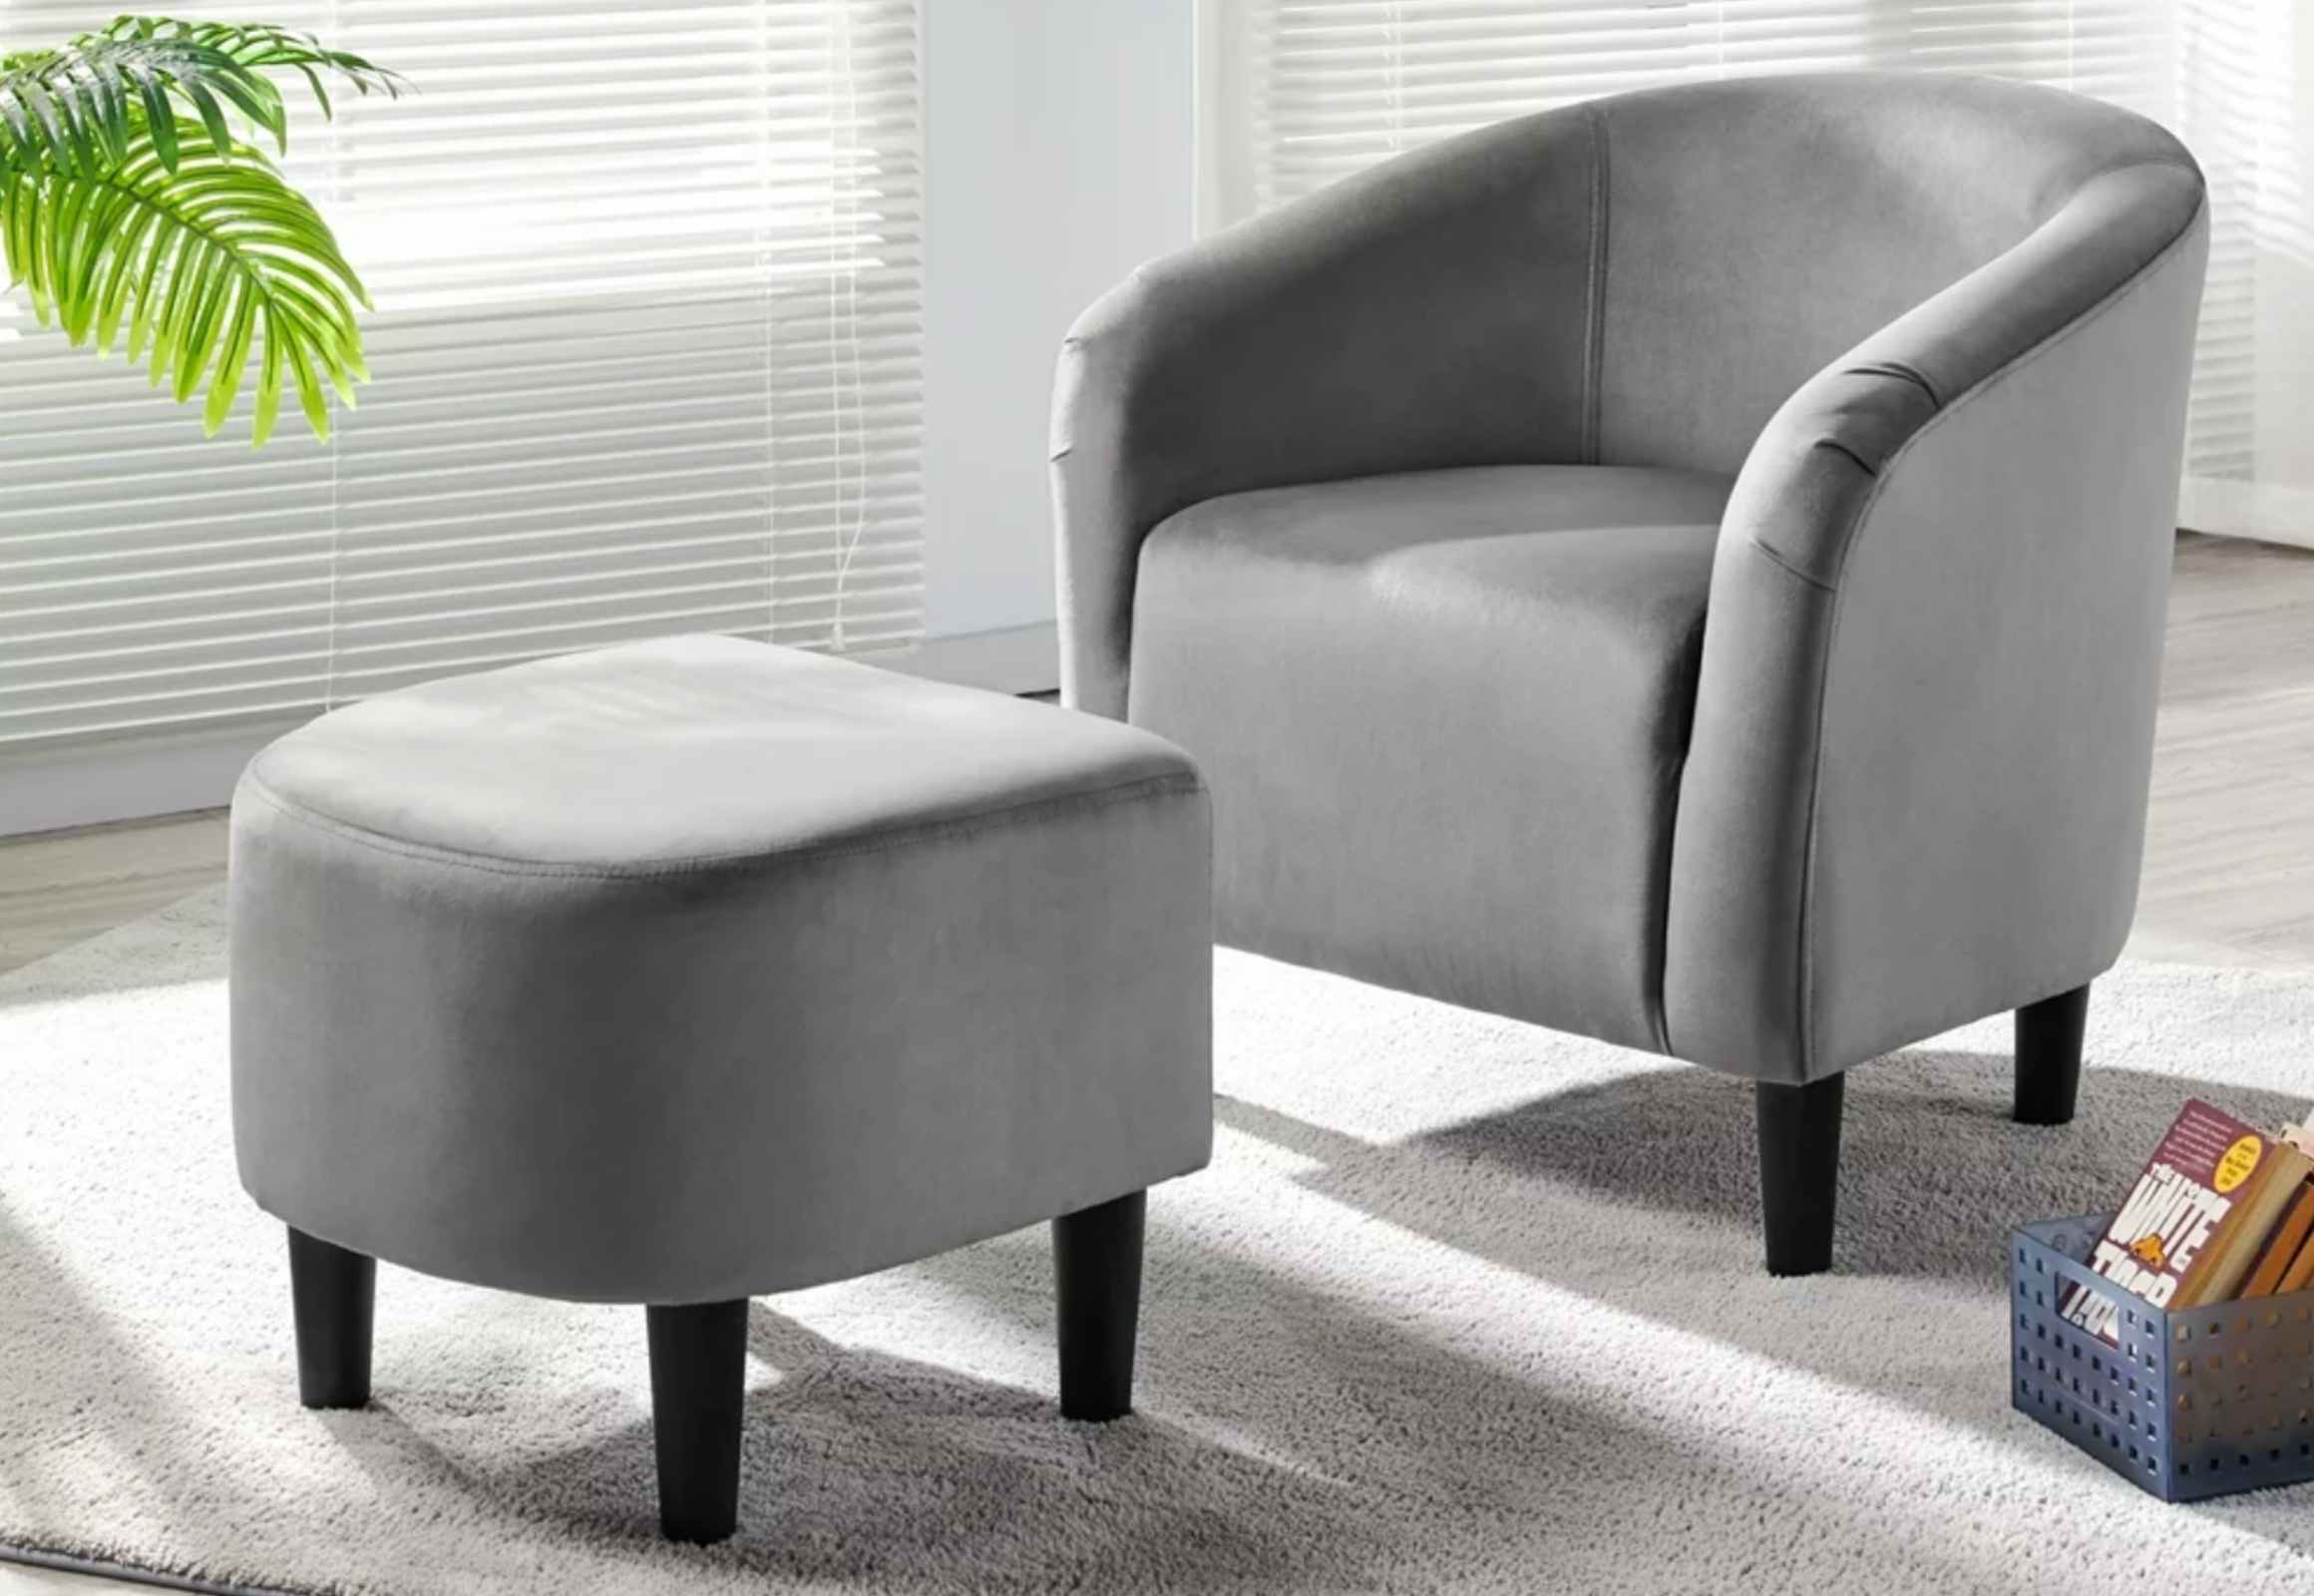 This Barrel Accent Chair With Ottoman Is on Rollback for $102 at Walmart